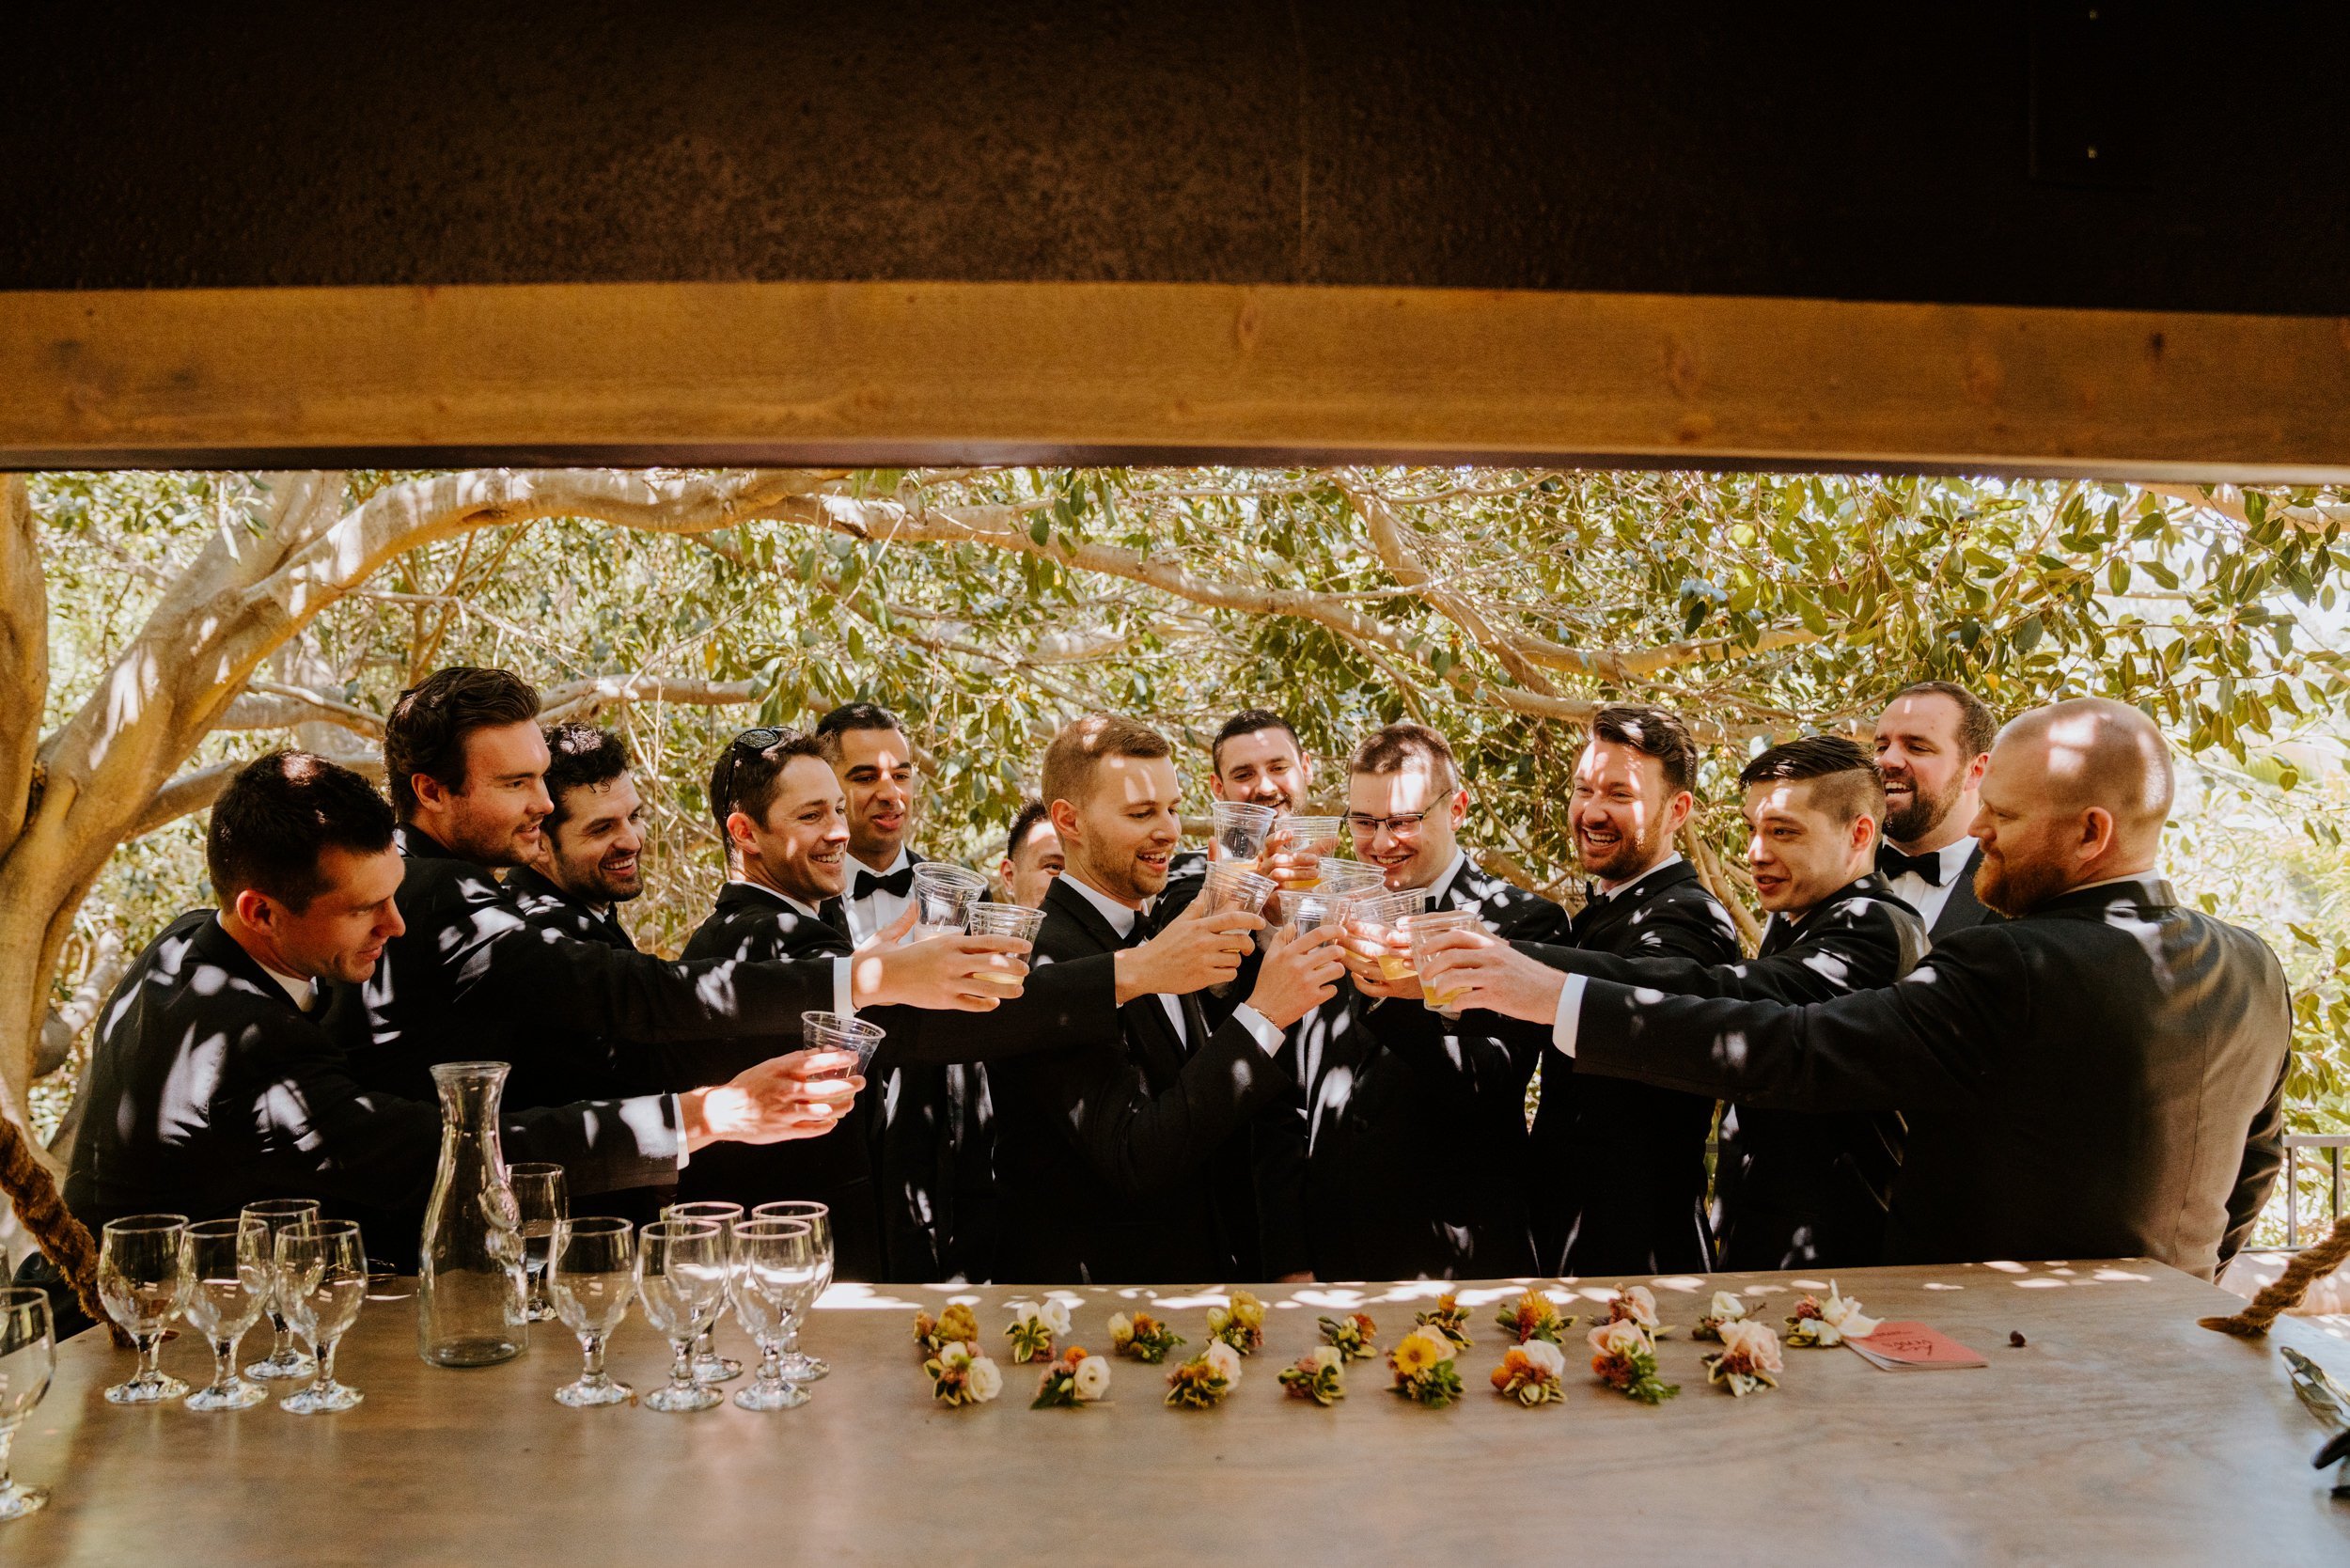 Groomsmen getting ready photo at Botanica Oceanside, photo by Tida Svy Photography